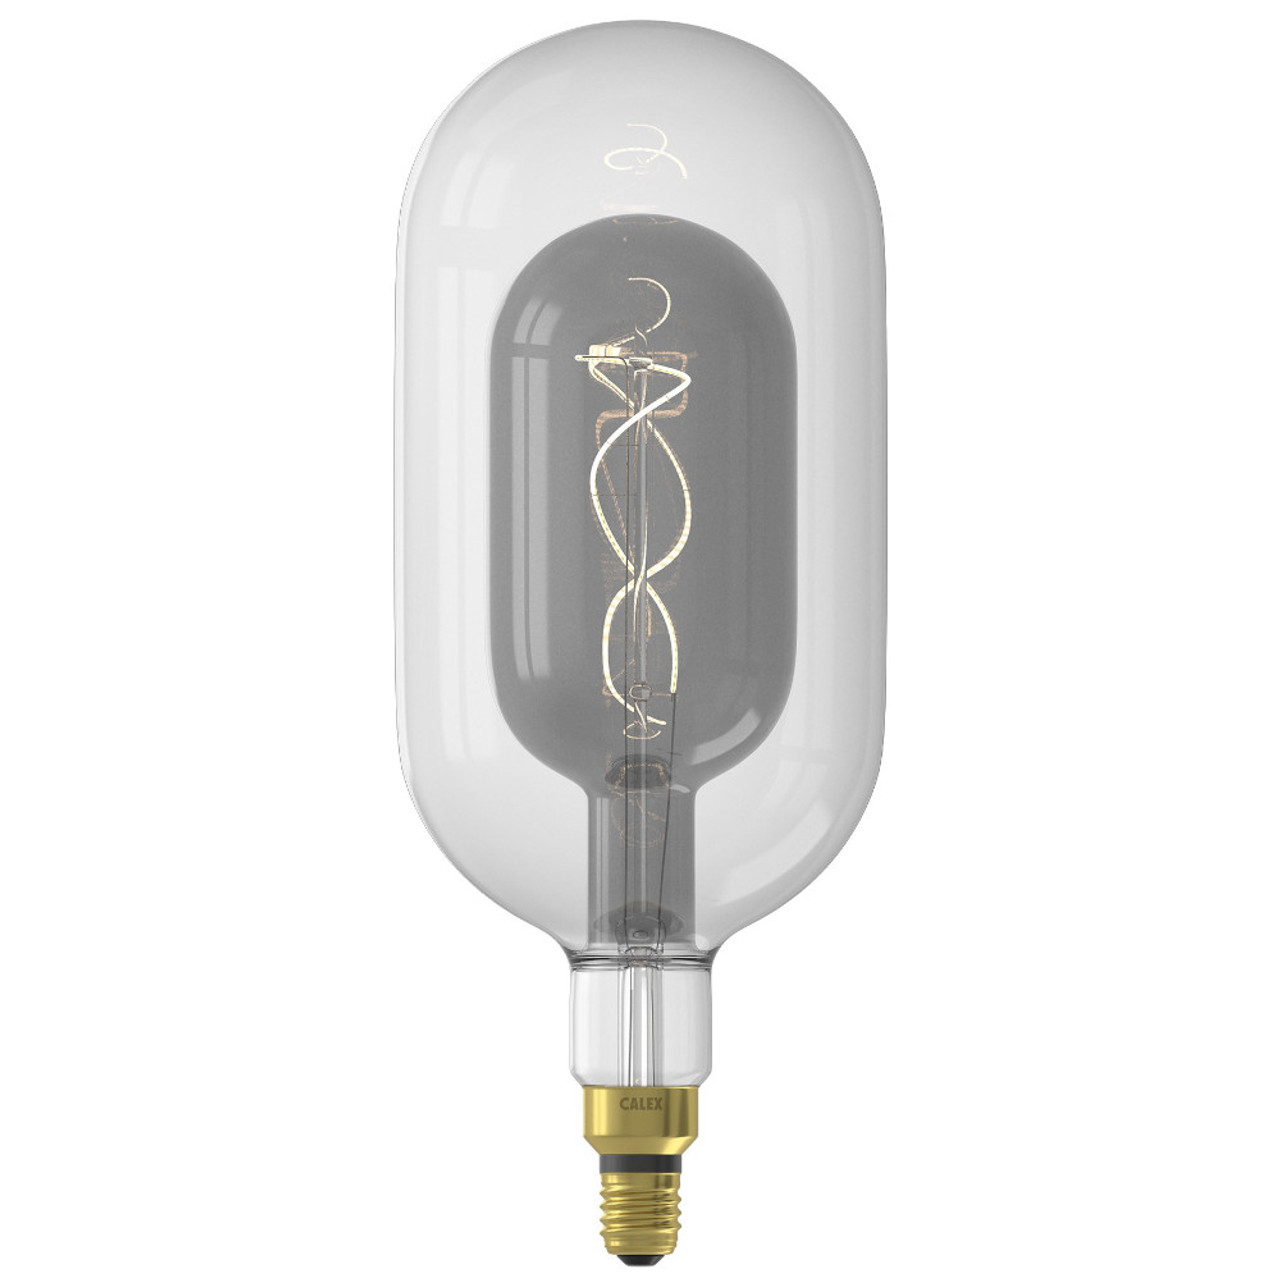 Calex LED Sundsvall Fusion Lamp 3W 80lm E27 1800K Clear/Titanium Dimmable